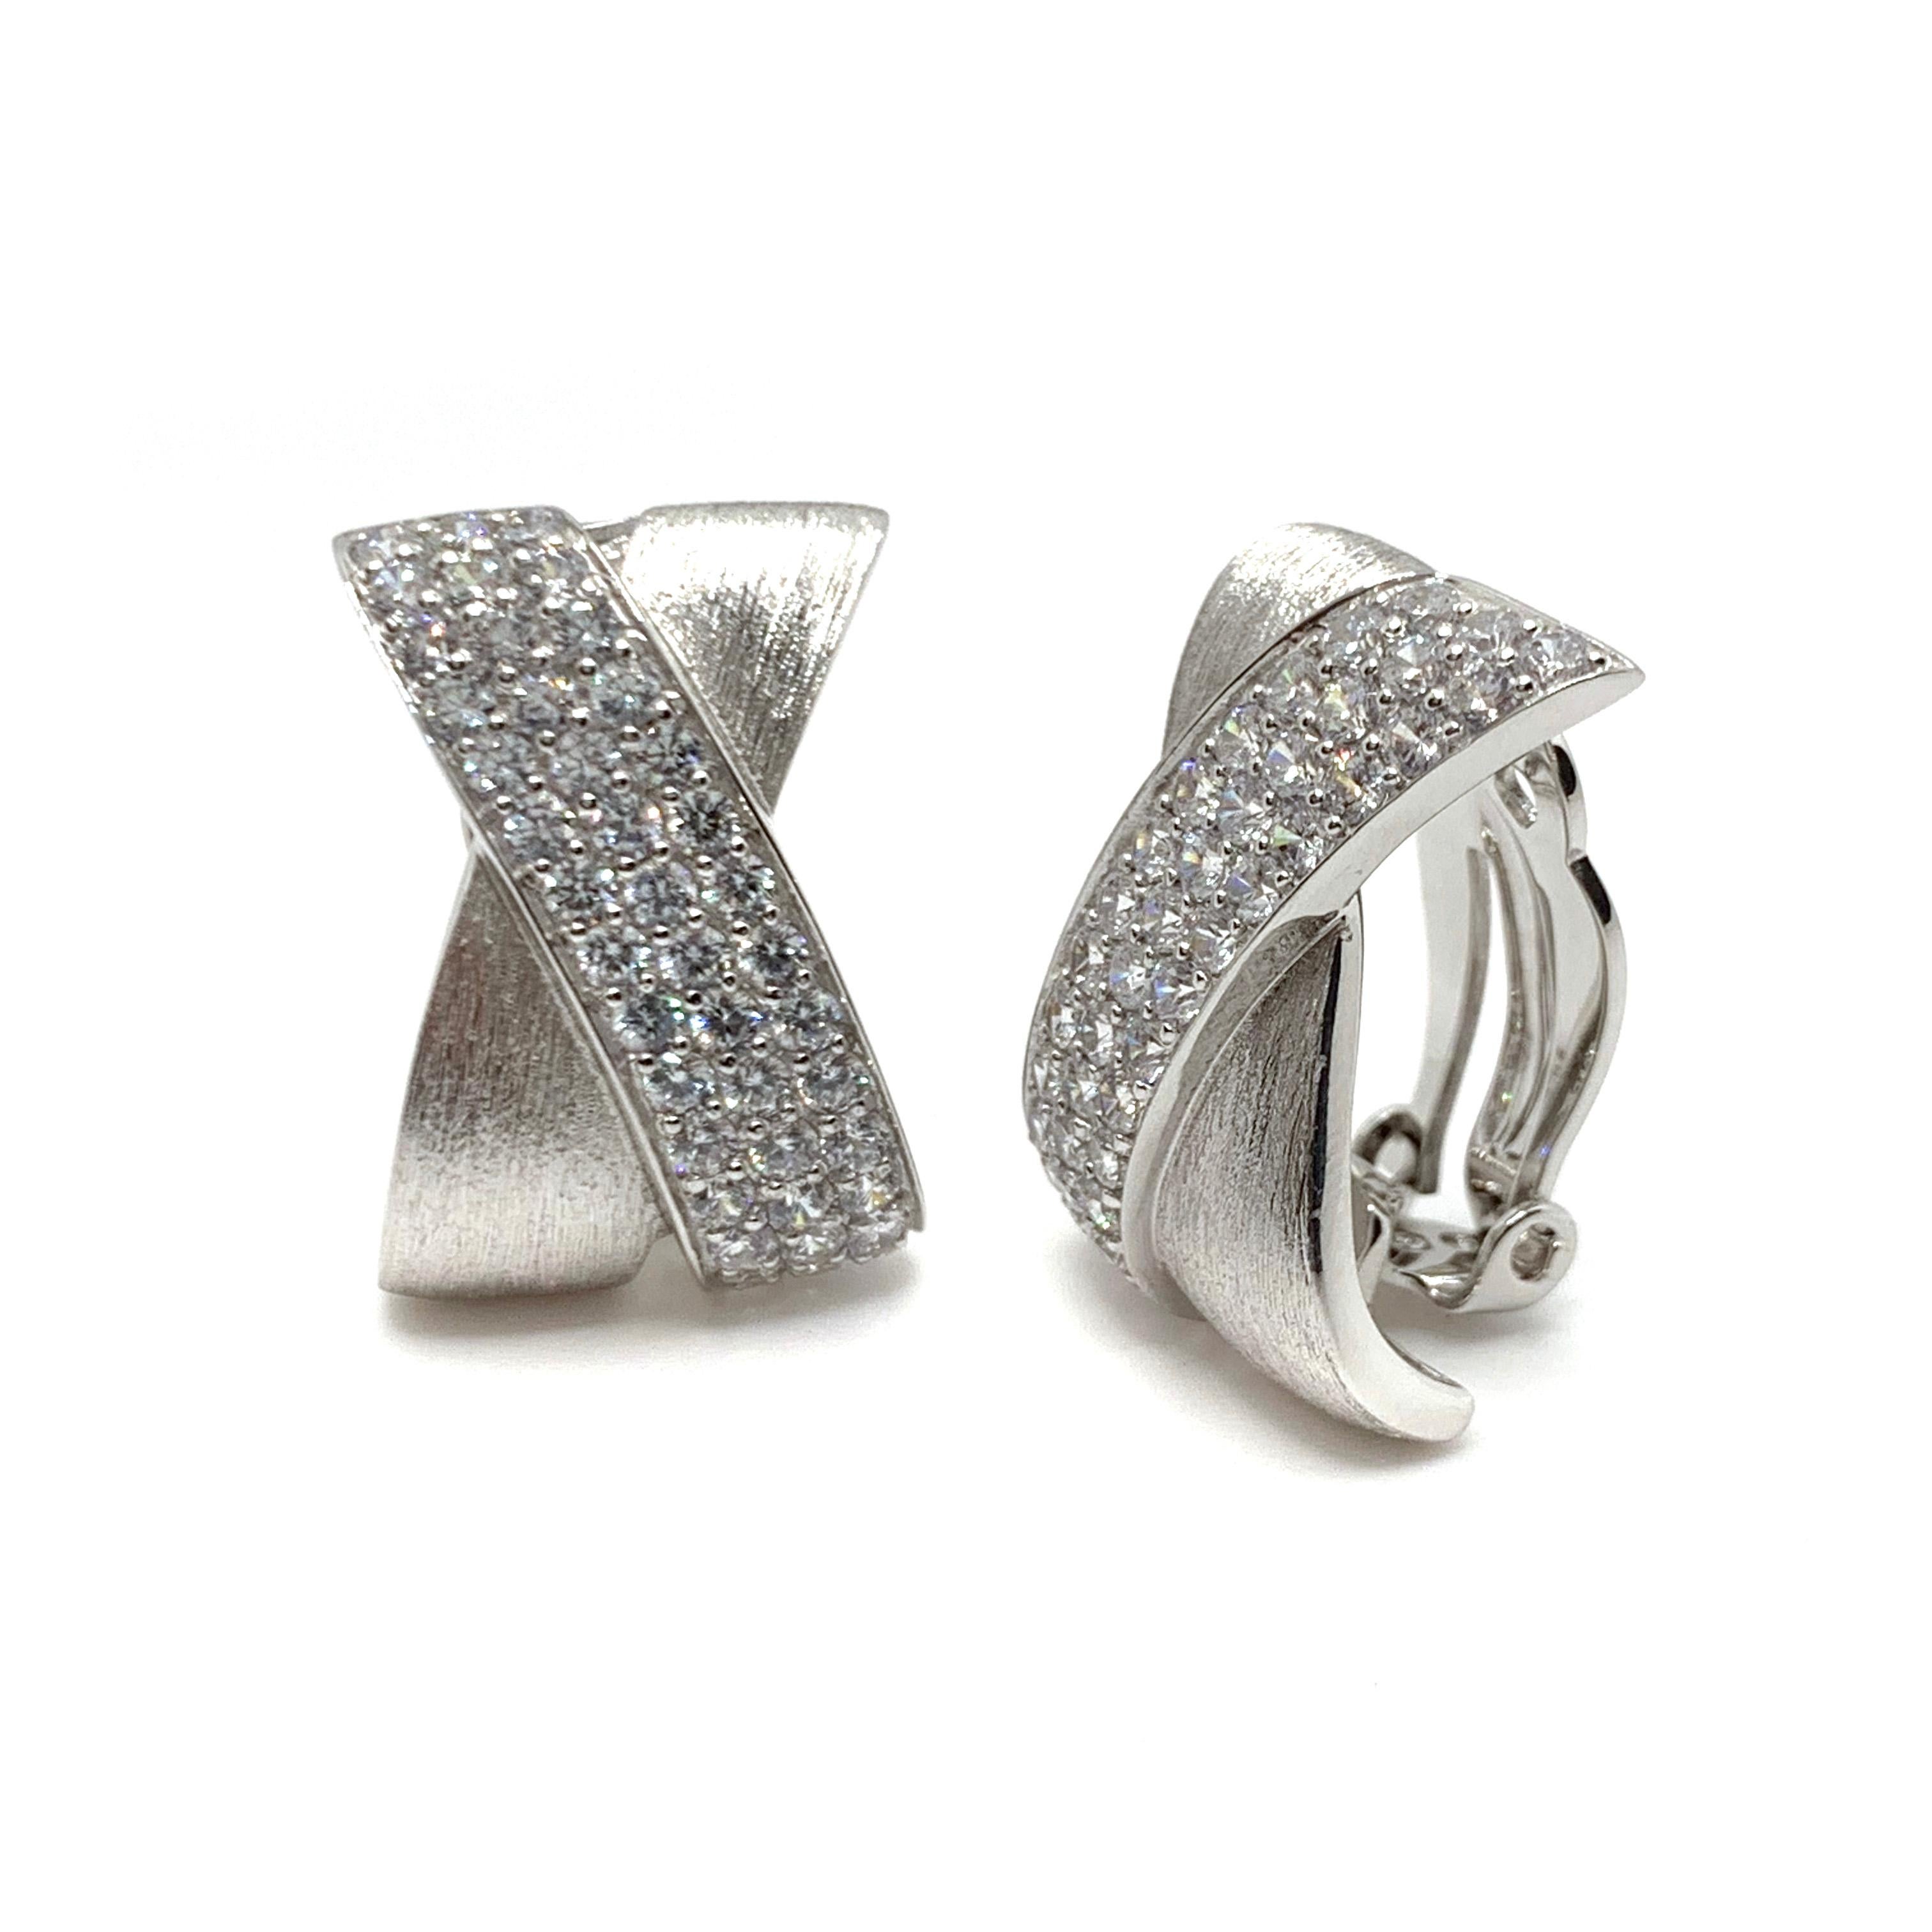 Bijoux Num's Sophisticated X-shape Pave and Sterling Silver Clip-on Earrings

These classic and sophisticate-style earrings feature 90pcs of round simulated diamonds pave-handset in platinum rhodium plated sterling silver, large and comfortable clip